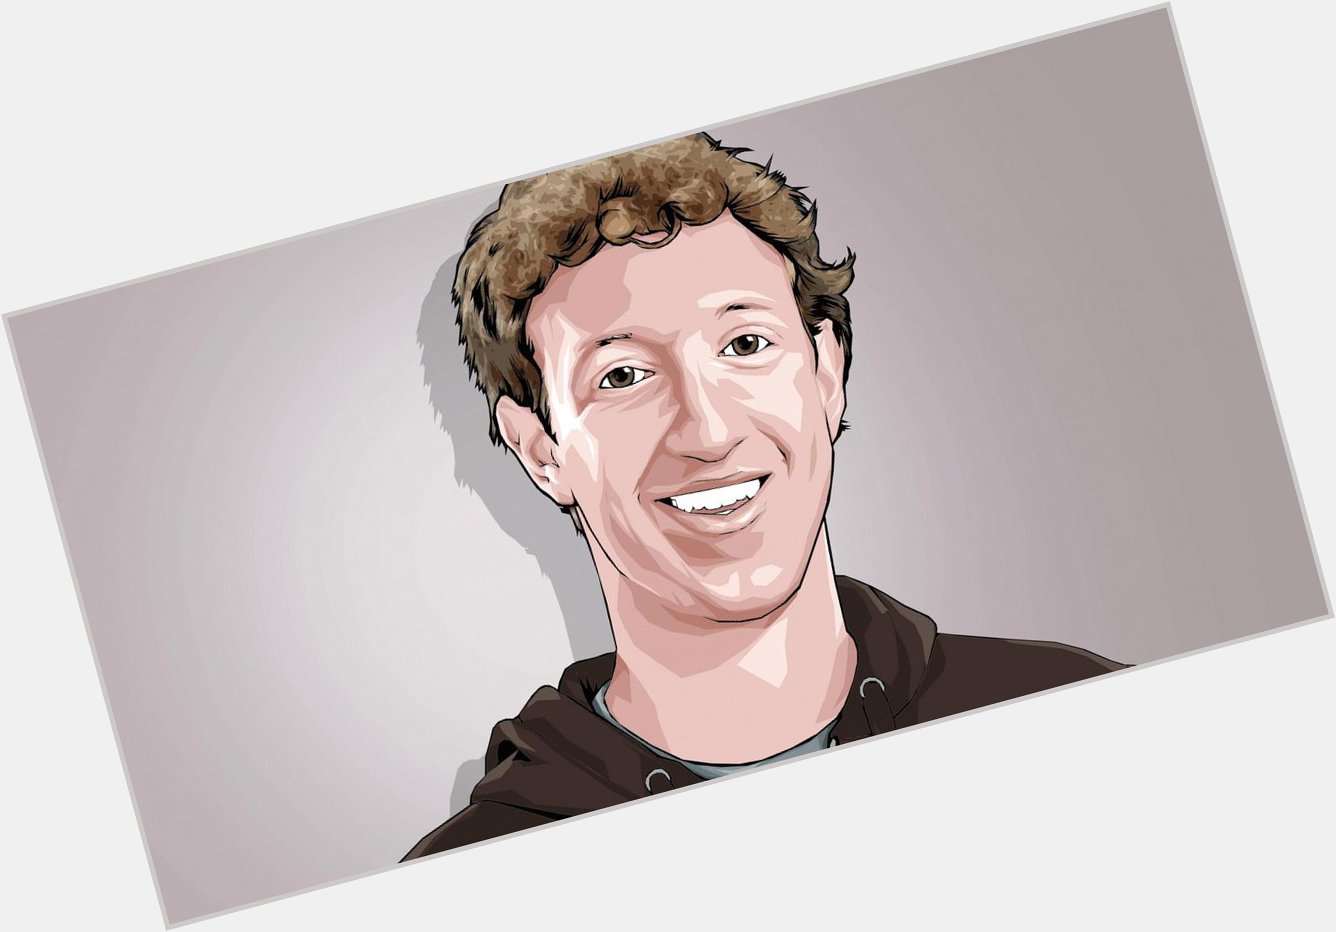 Happy Birthday Mark Zuckerberg! Here are some of our favorite quotes from Mark:  